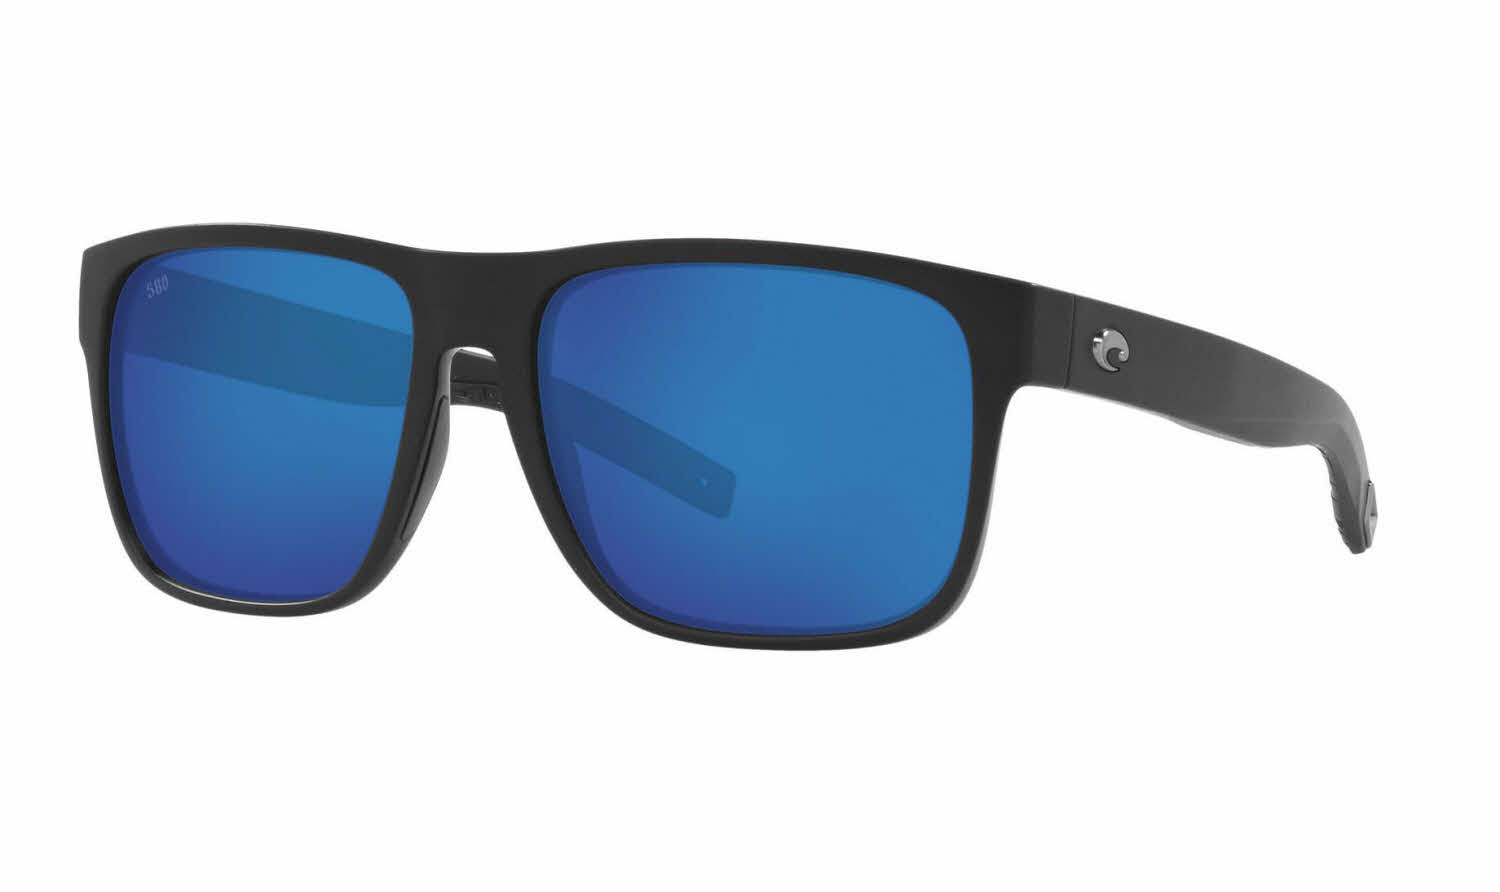 https://www.framesdirect.com/product_elarge_images/costa-sunglasses-spearo-xl-06S9013-01.jpg